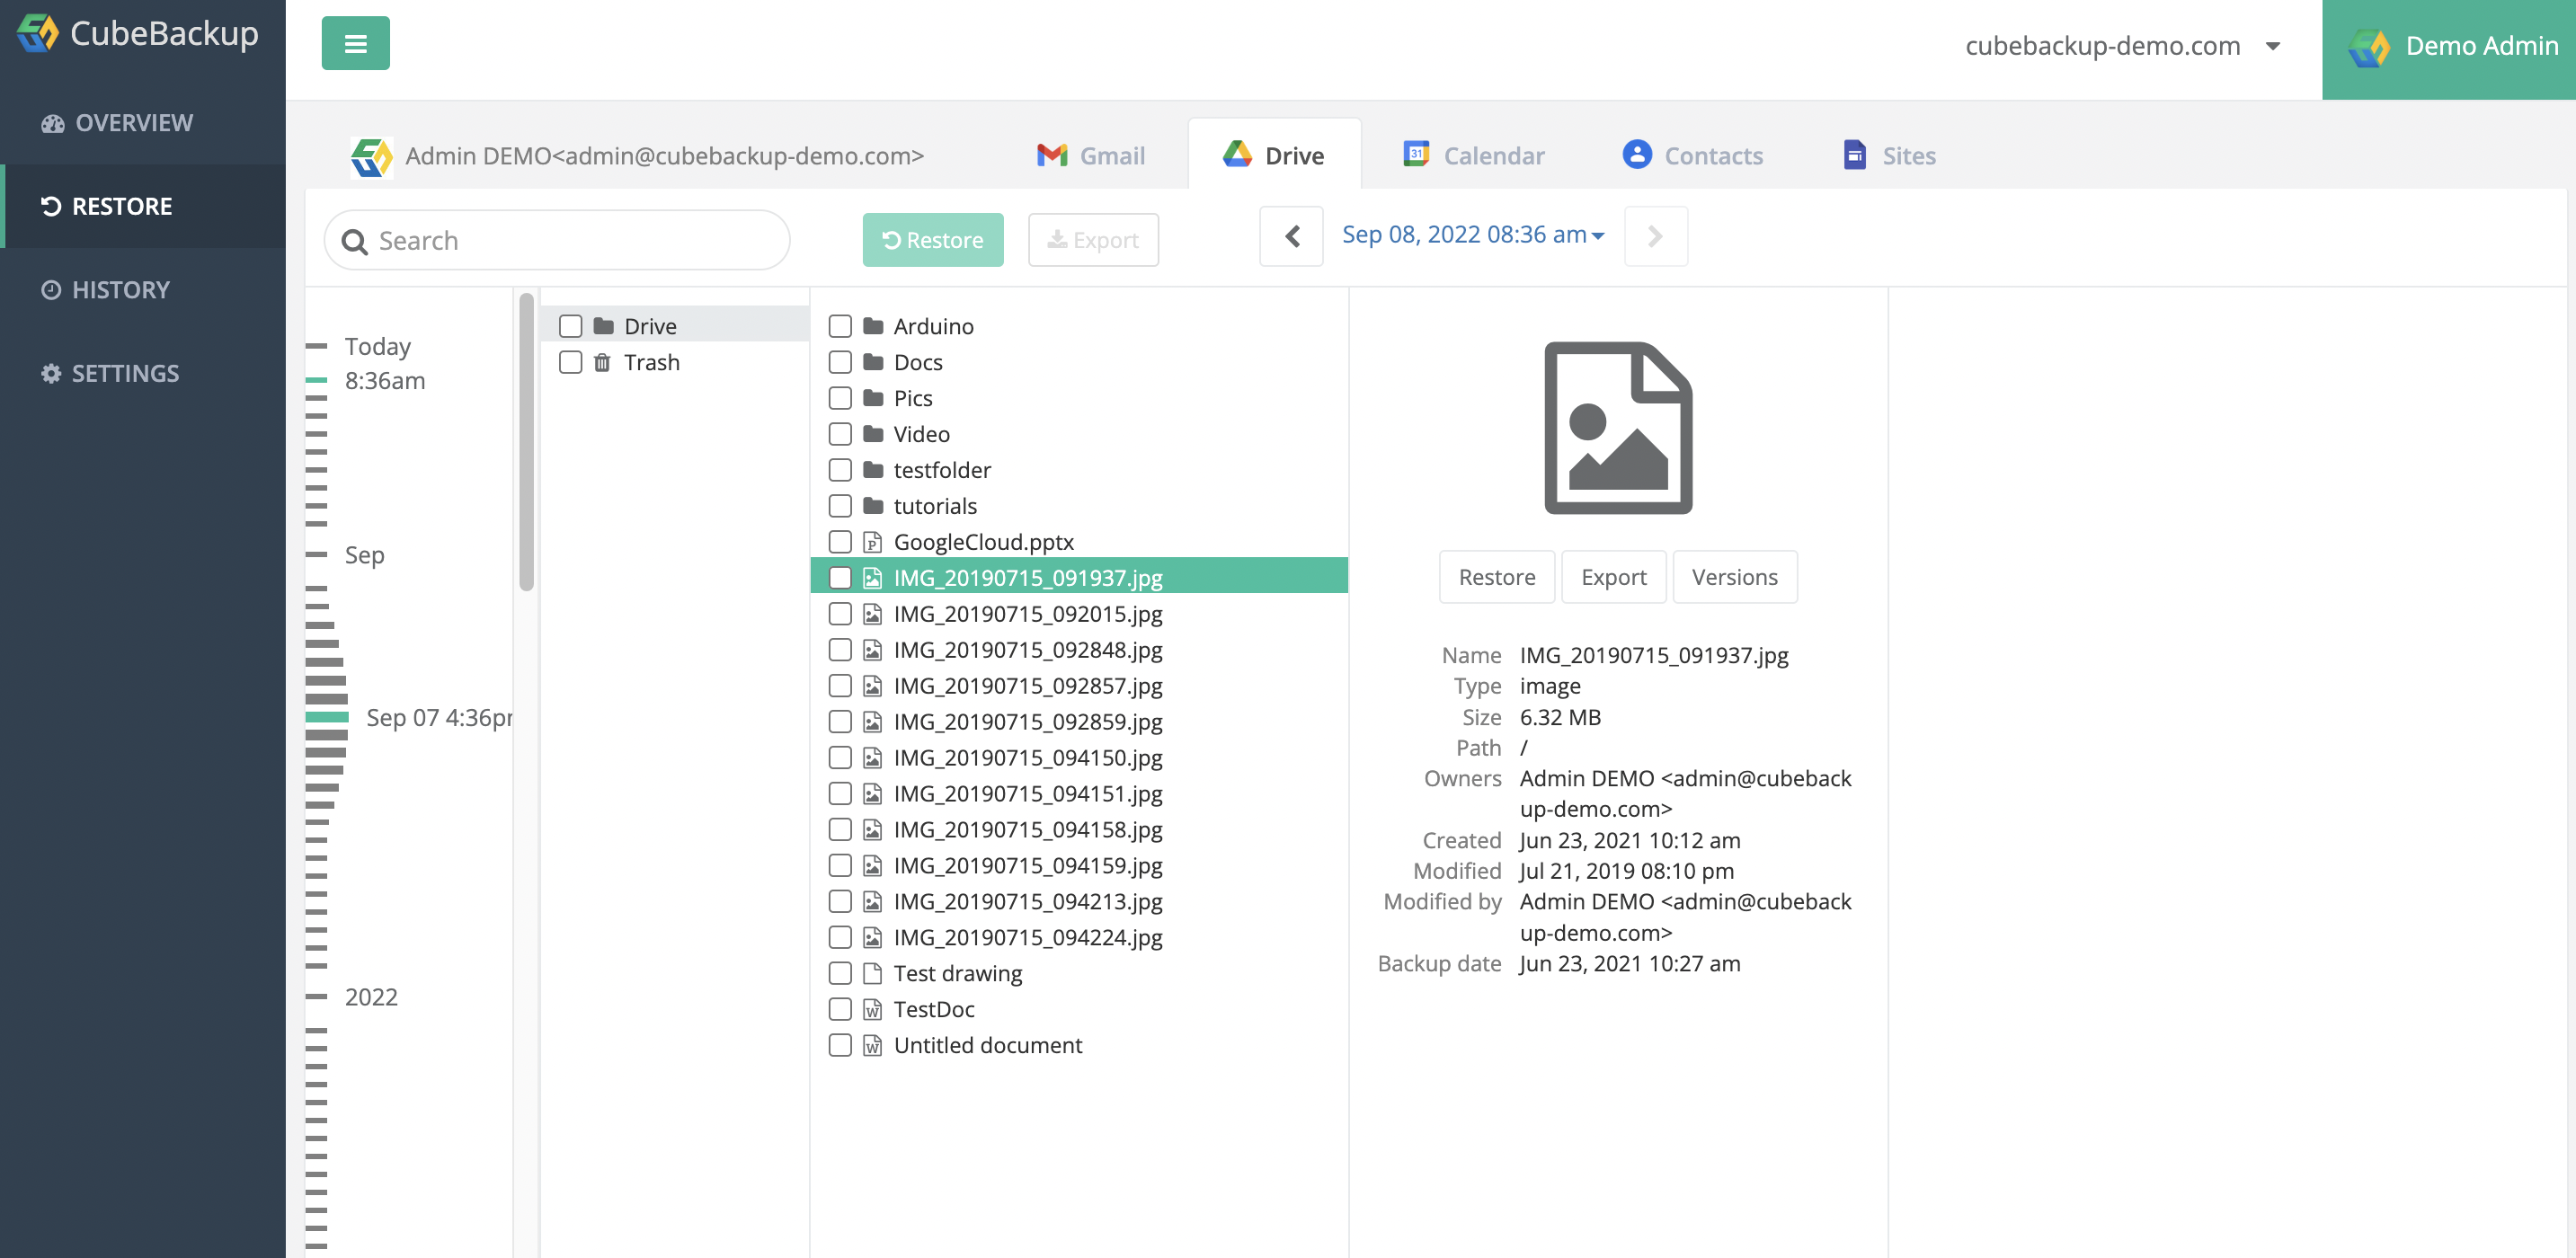 Point-in-time backup snapshot of Google Drive